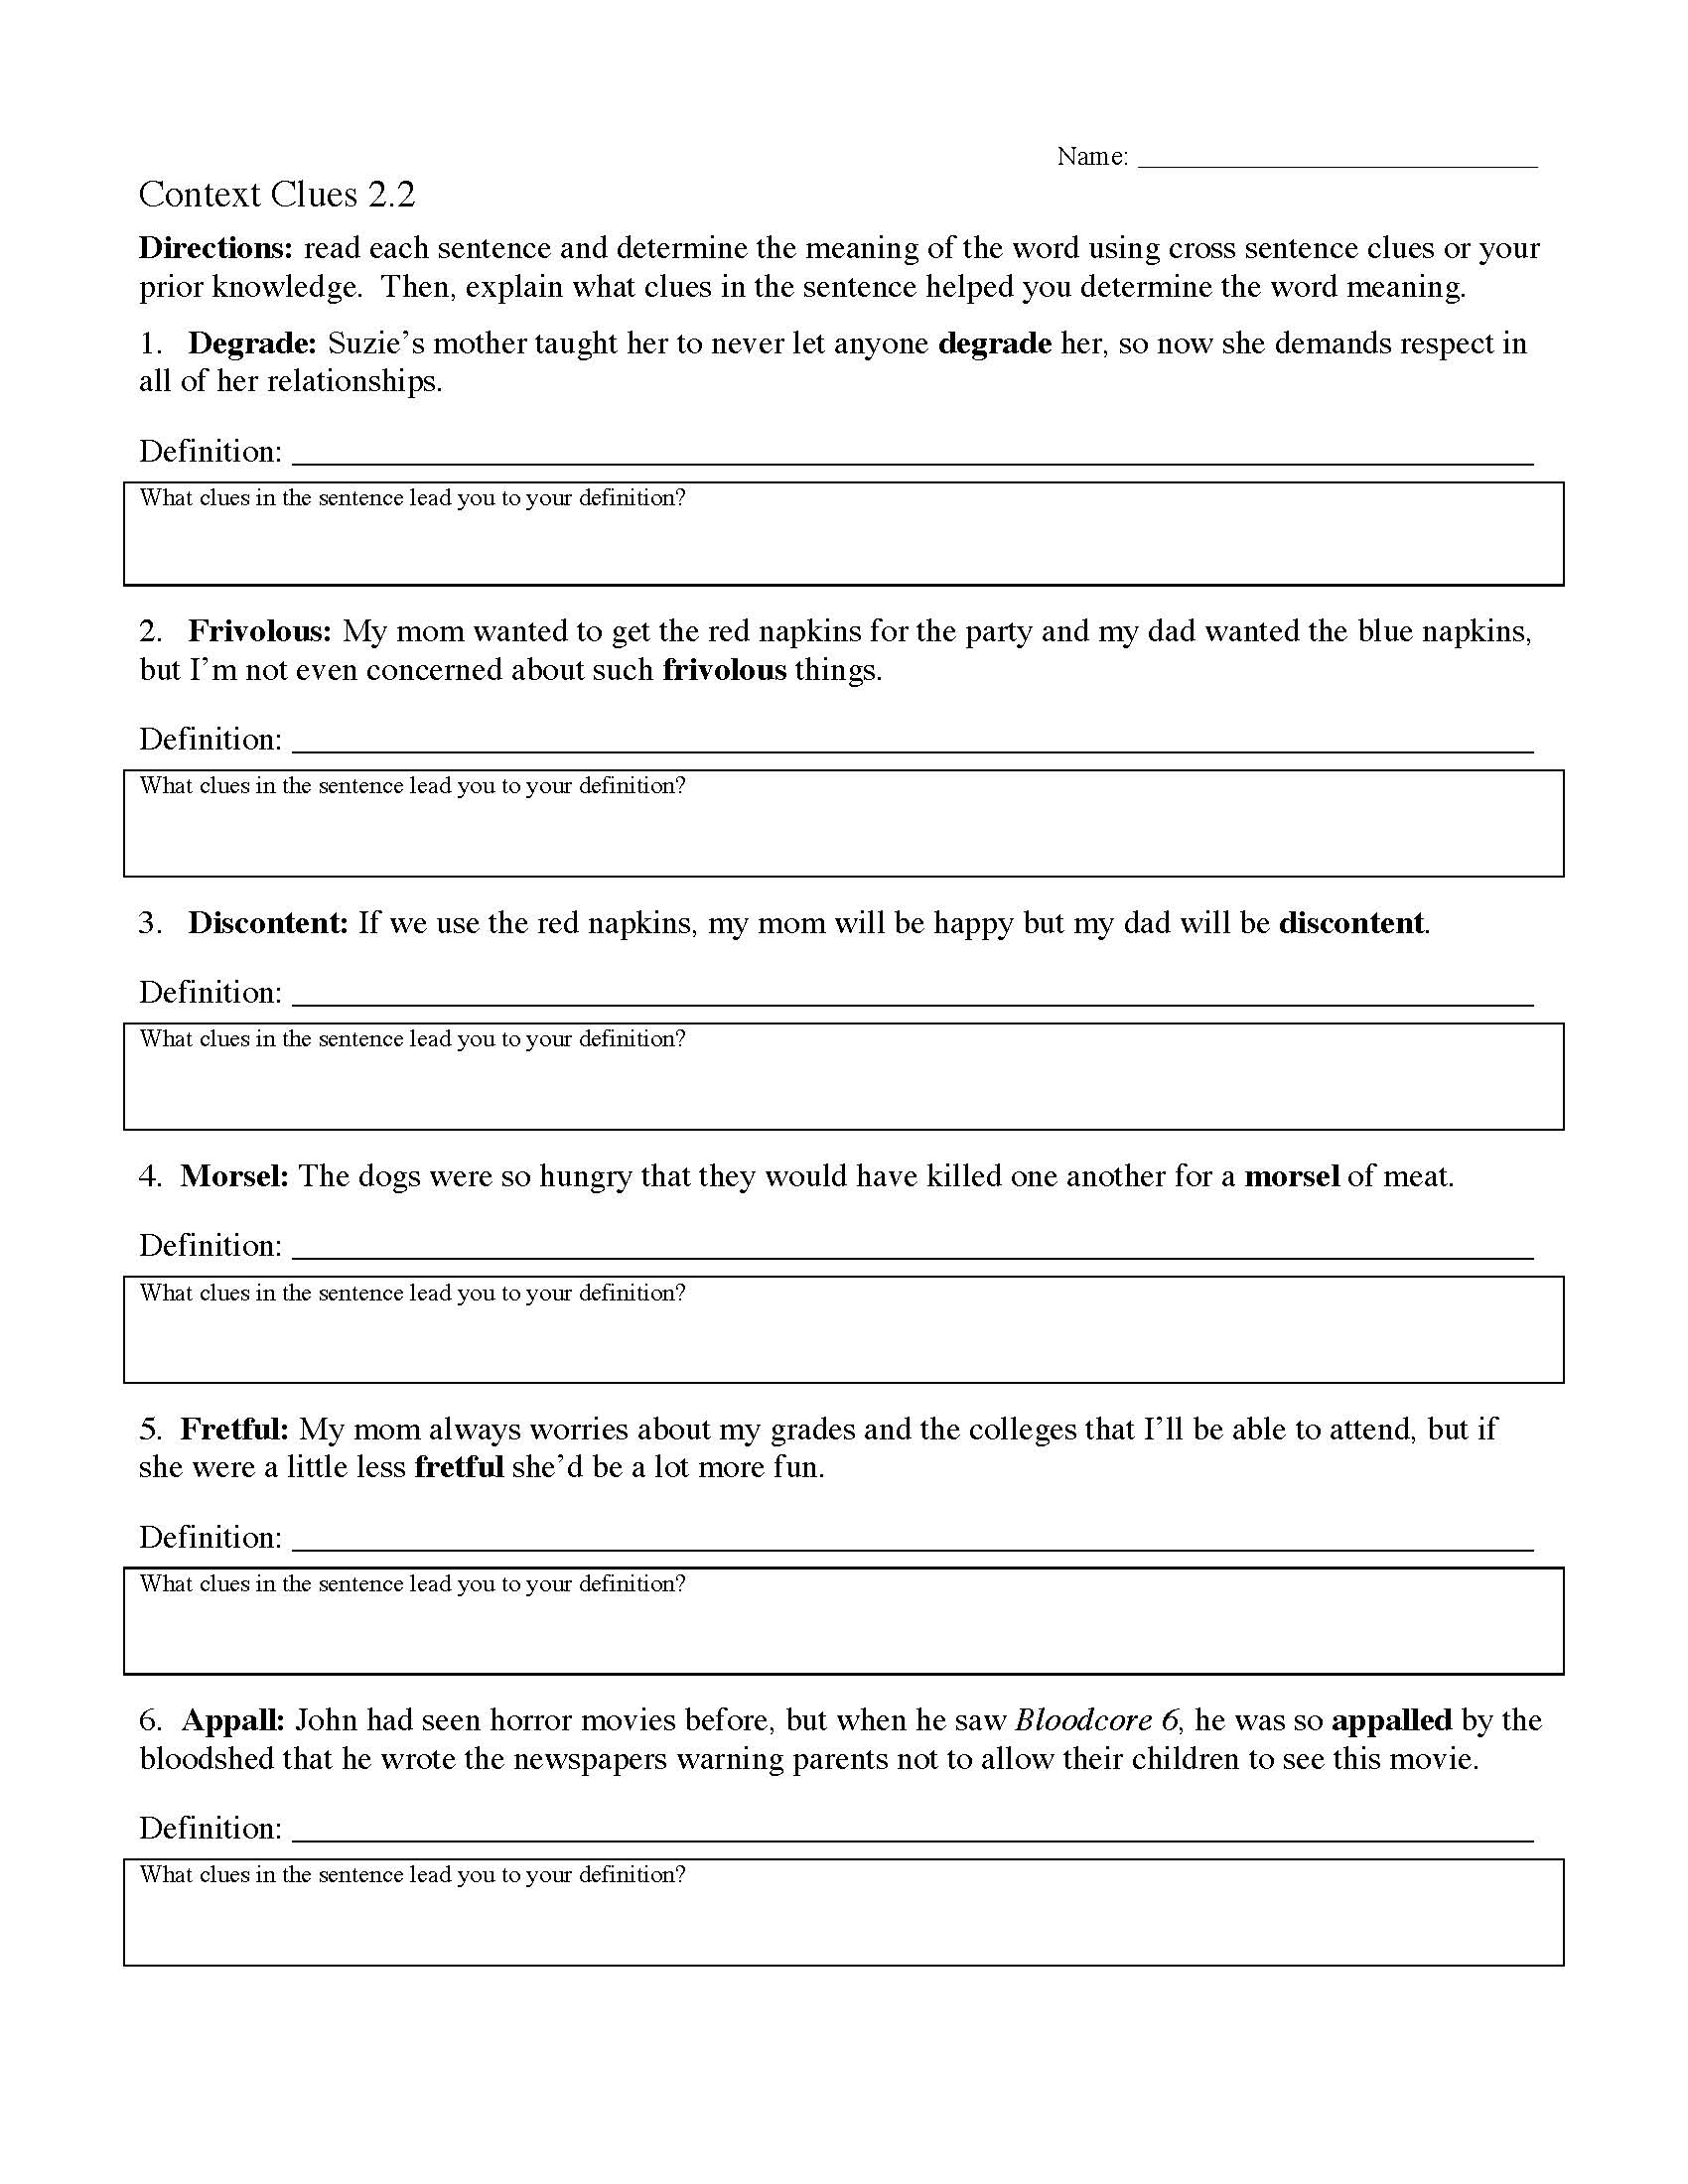 This is a preview image of Context Clues Worksheet 2.2. Click on it to enlarge it or view the source file.